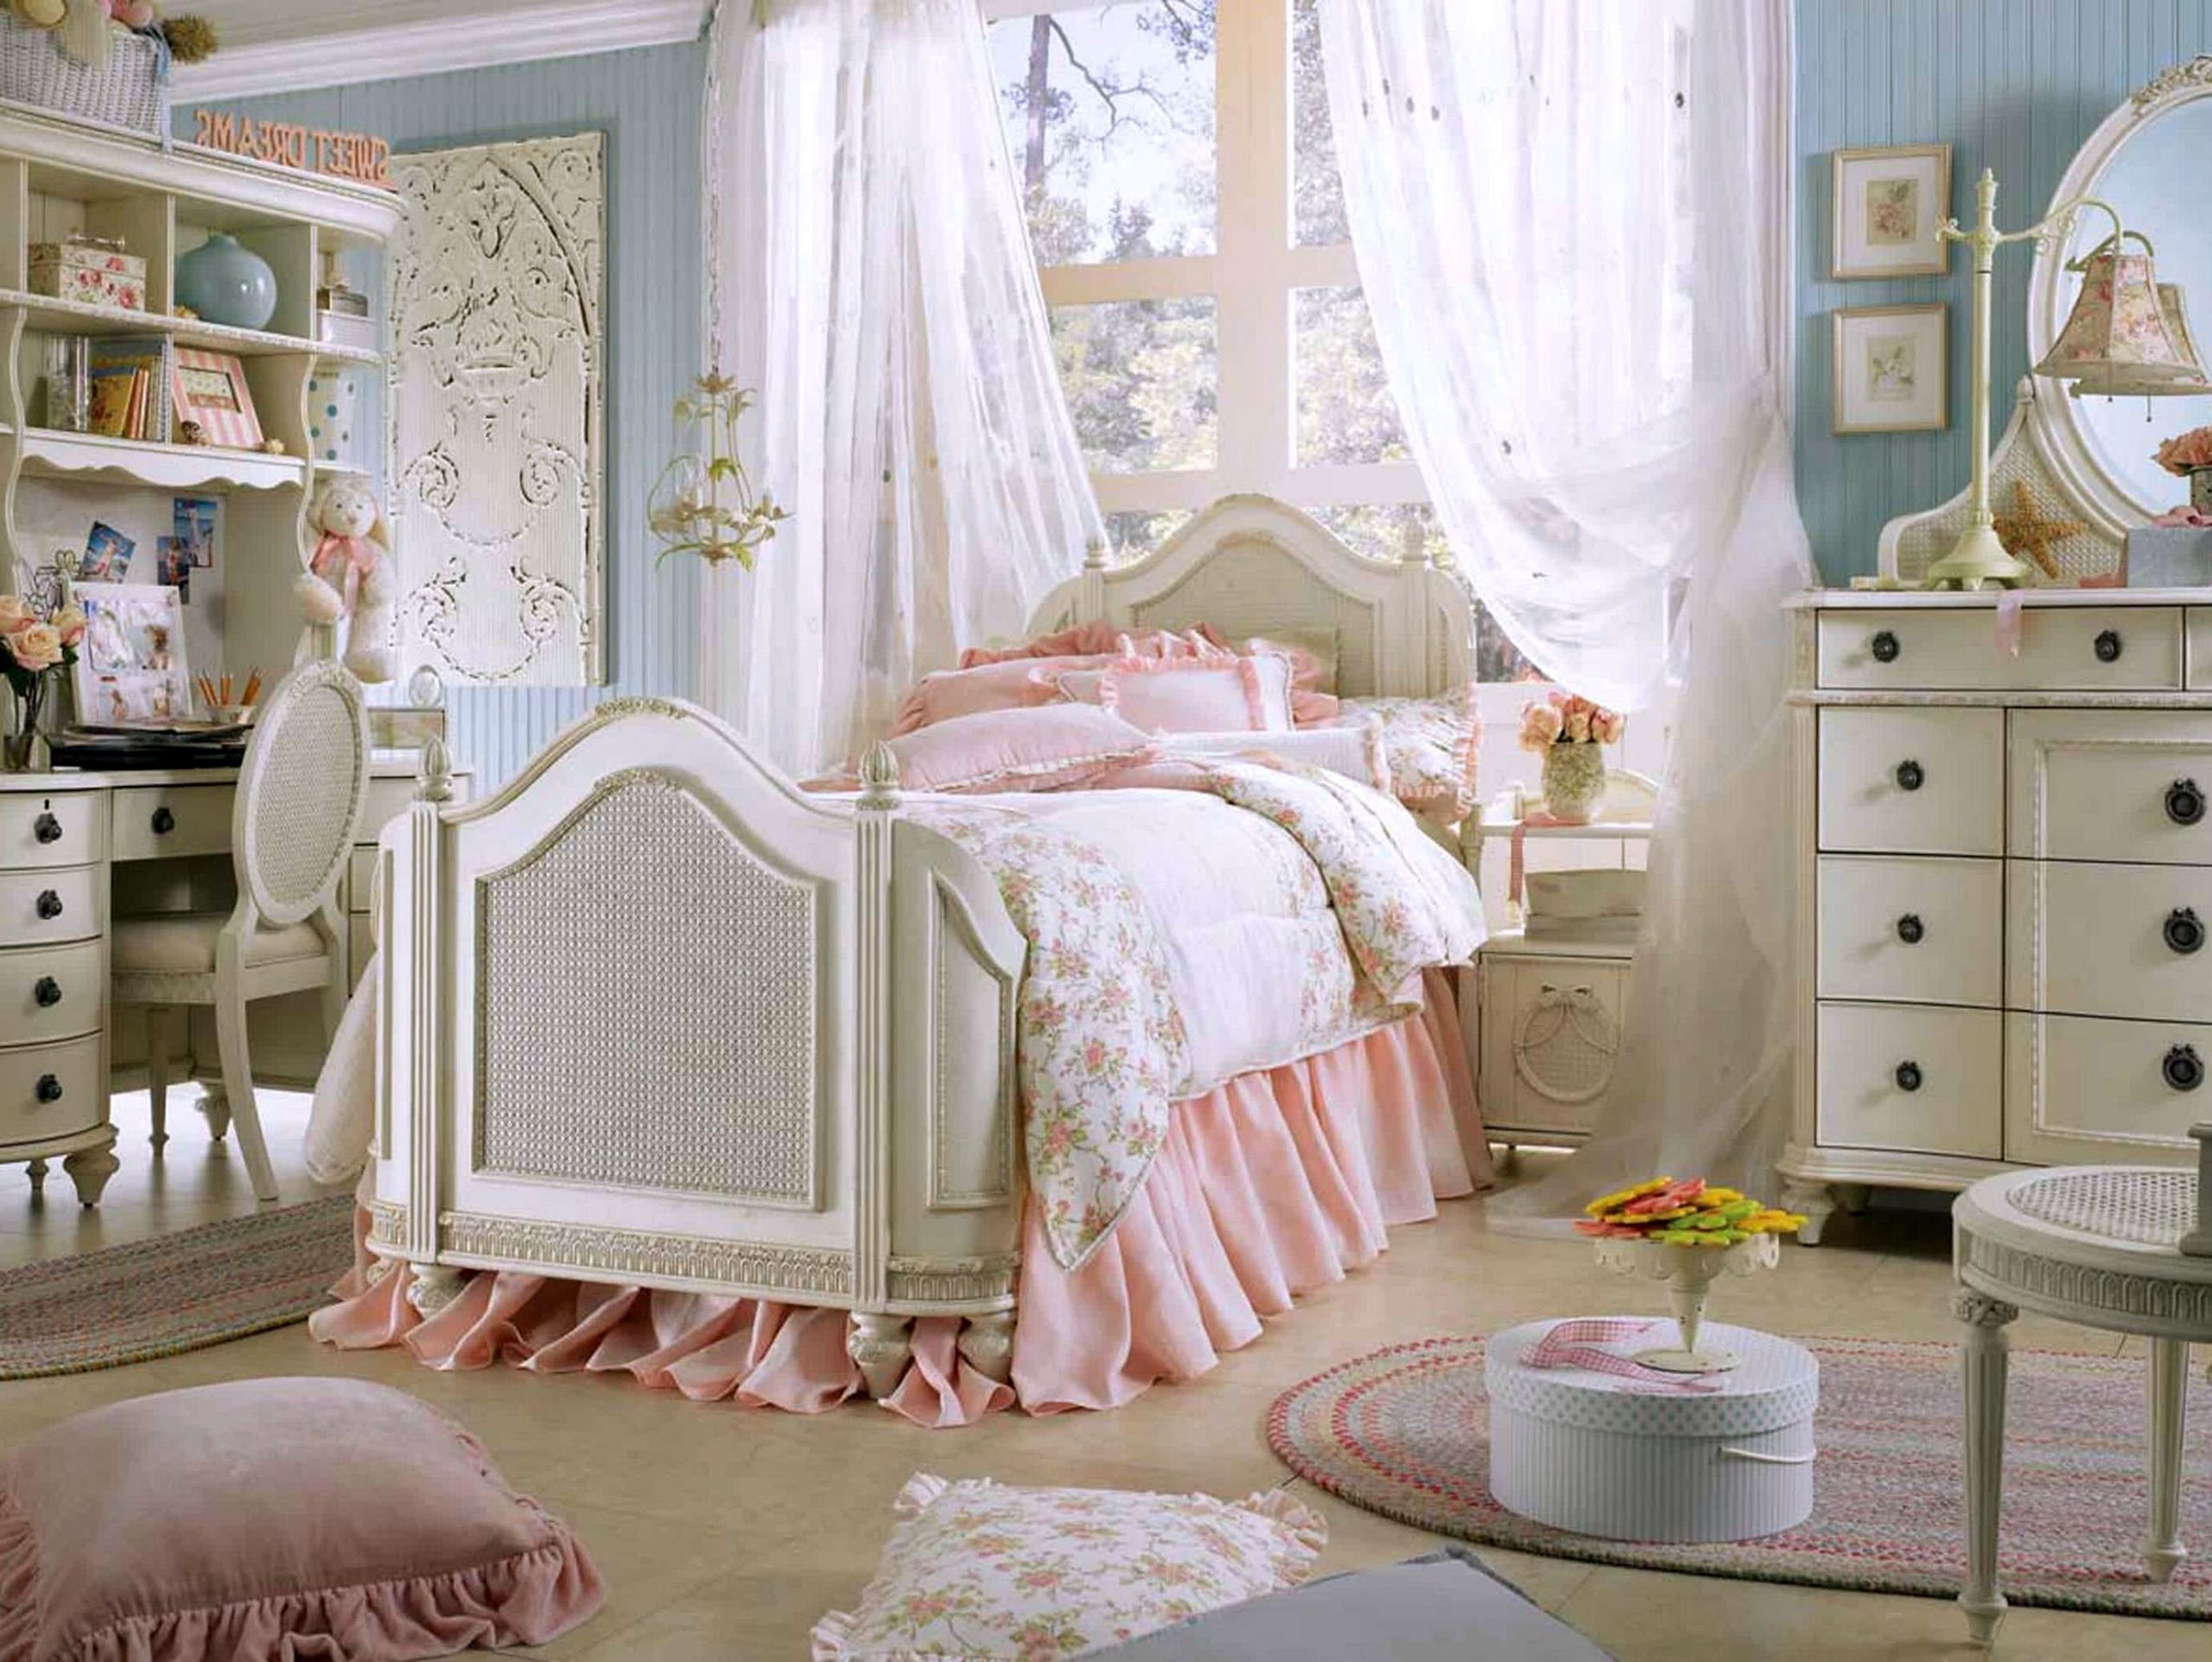 Shabby Chic Bedroom Ideas Vintage Romantic Look from Extended-rds